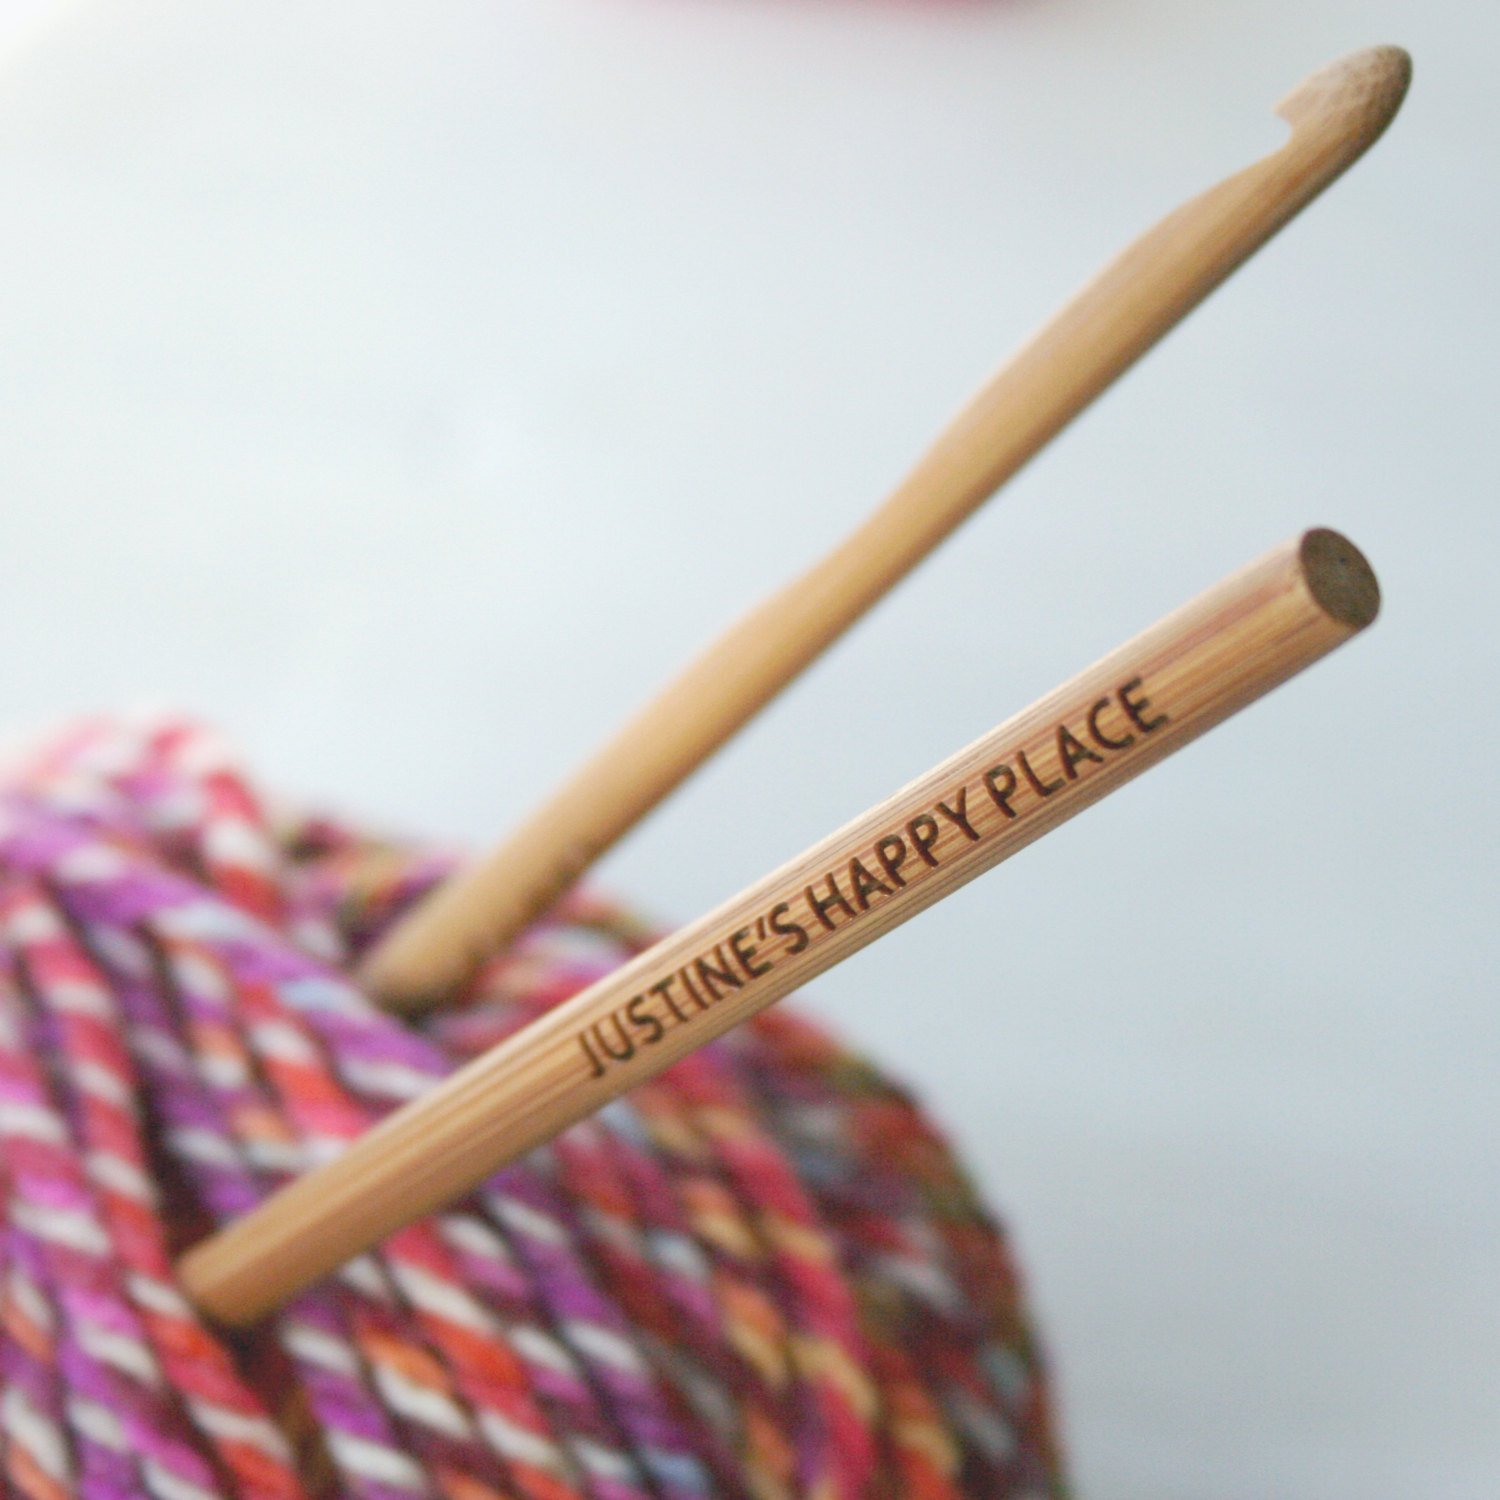 Creative personalized gifts: Customized wooden crochet hooks